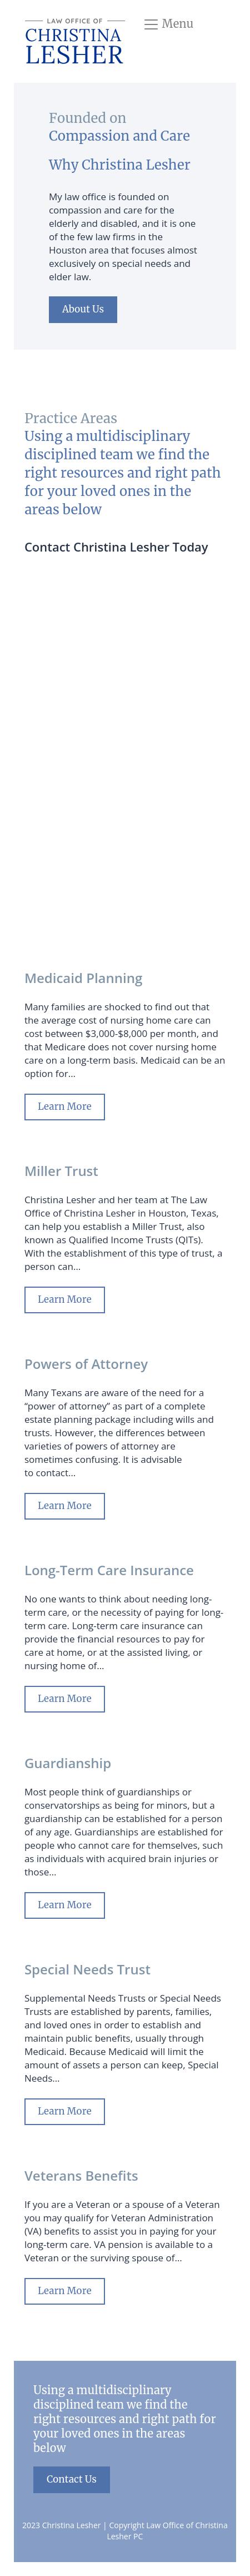 Law Office of Christina Lesher, P.C. - Houston TX Lawyers